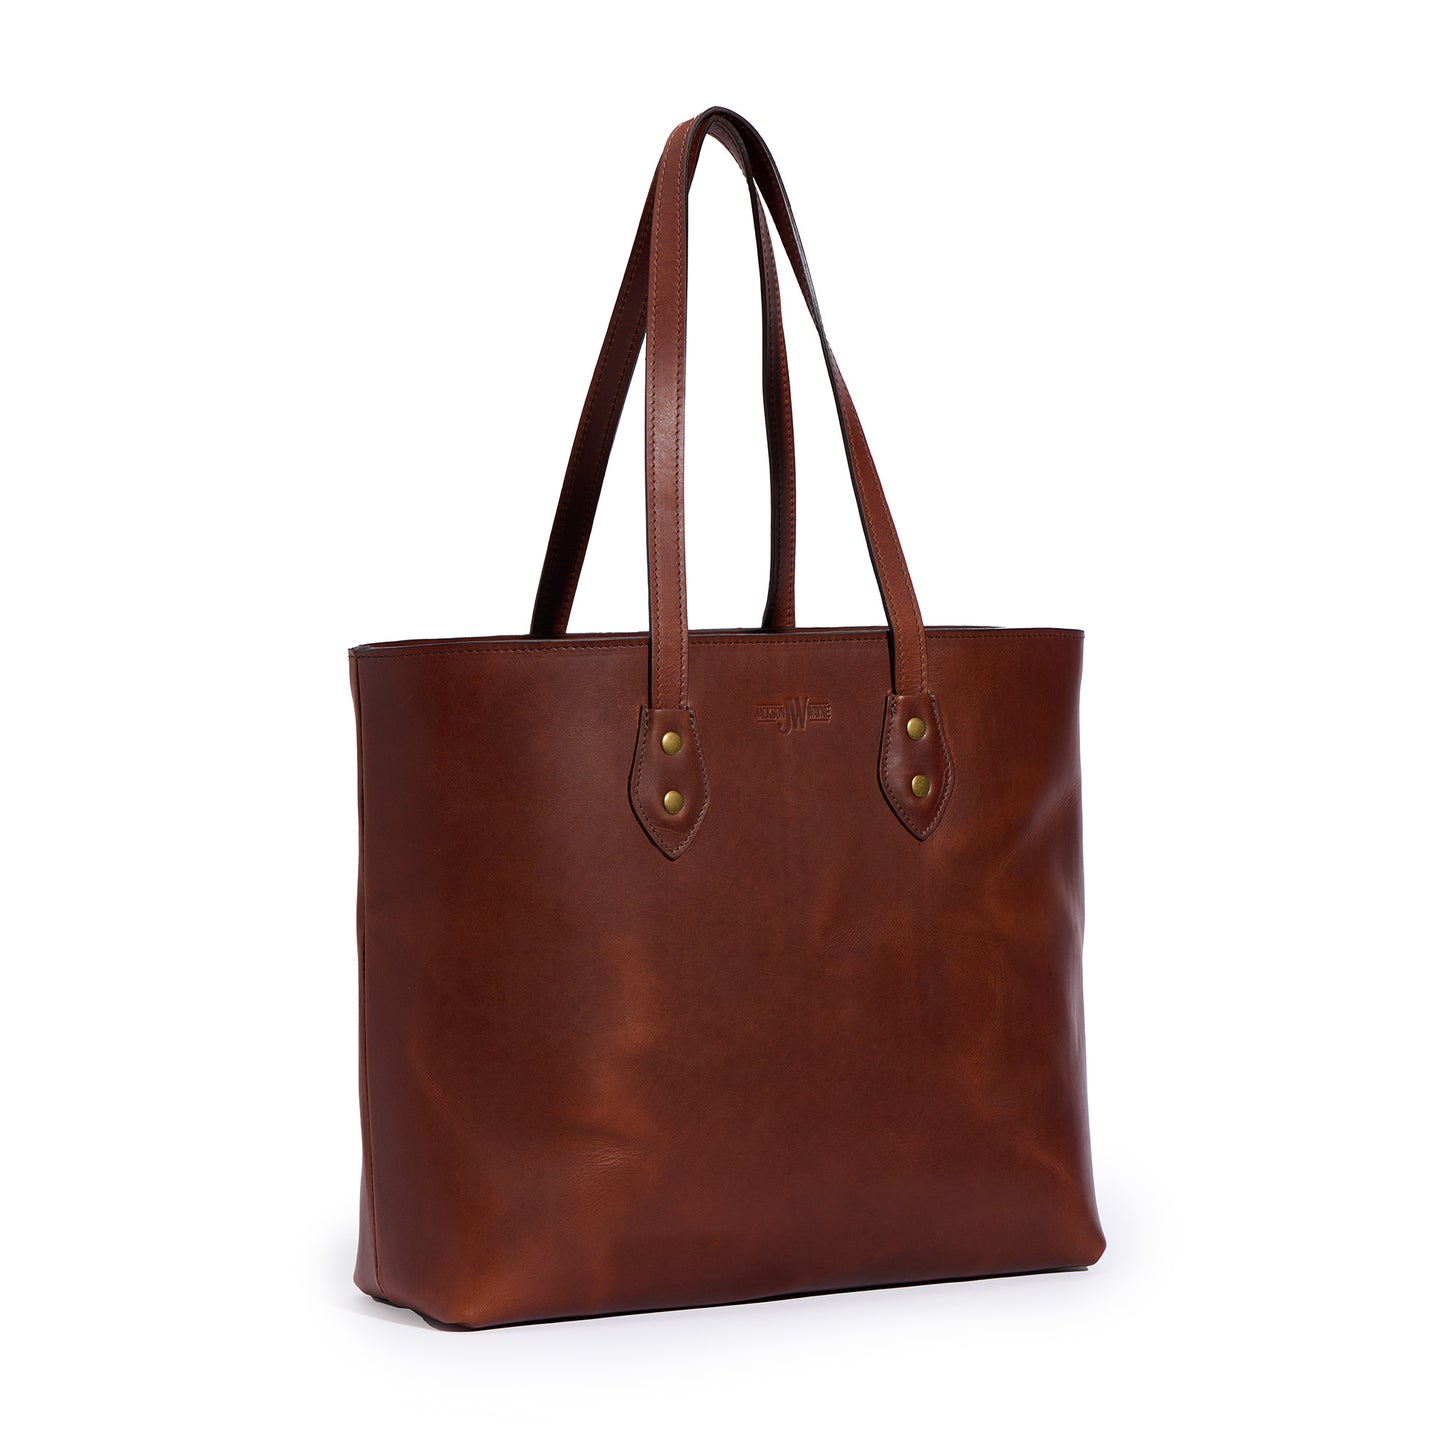 full grain leather tote bag by Jackson Wayne back side angle in vintage brown color